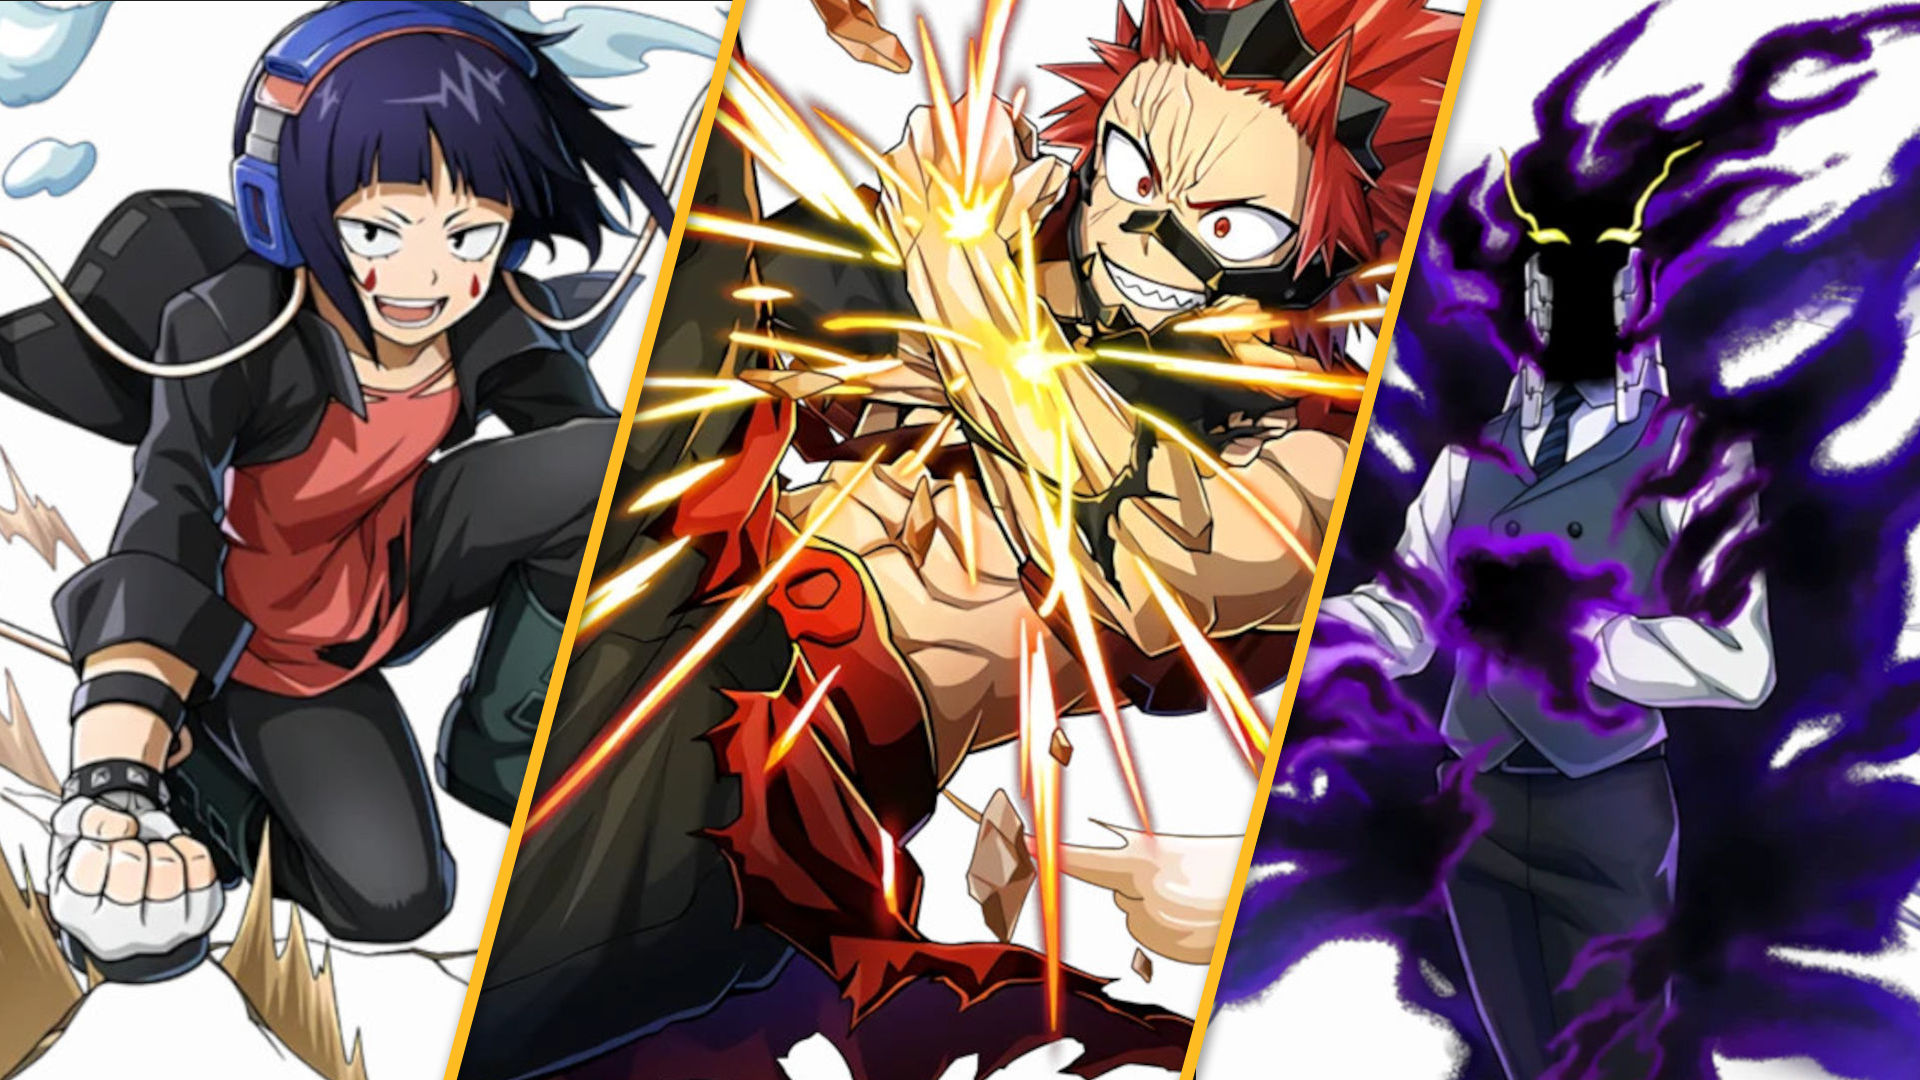 My Hero Ultra Impact characters – heroes and zeroes